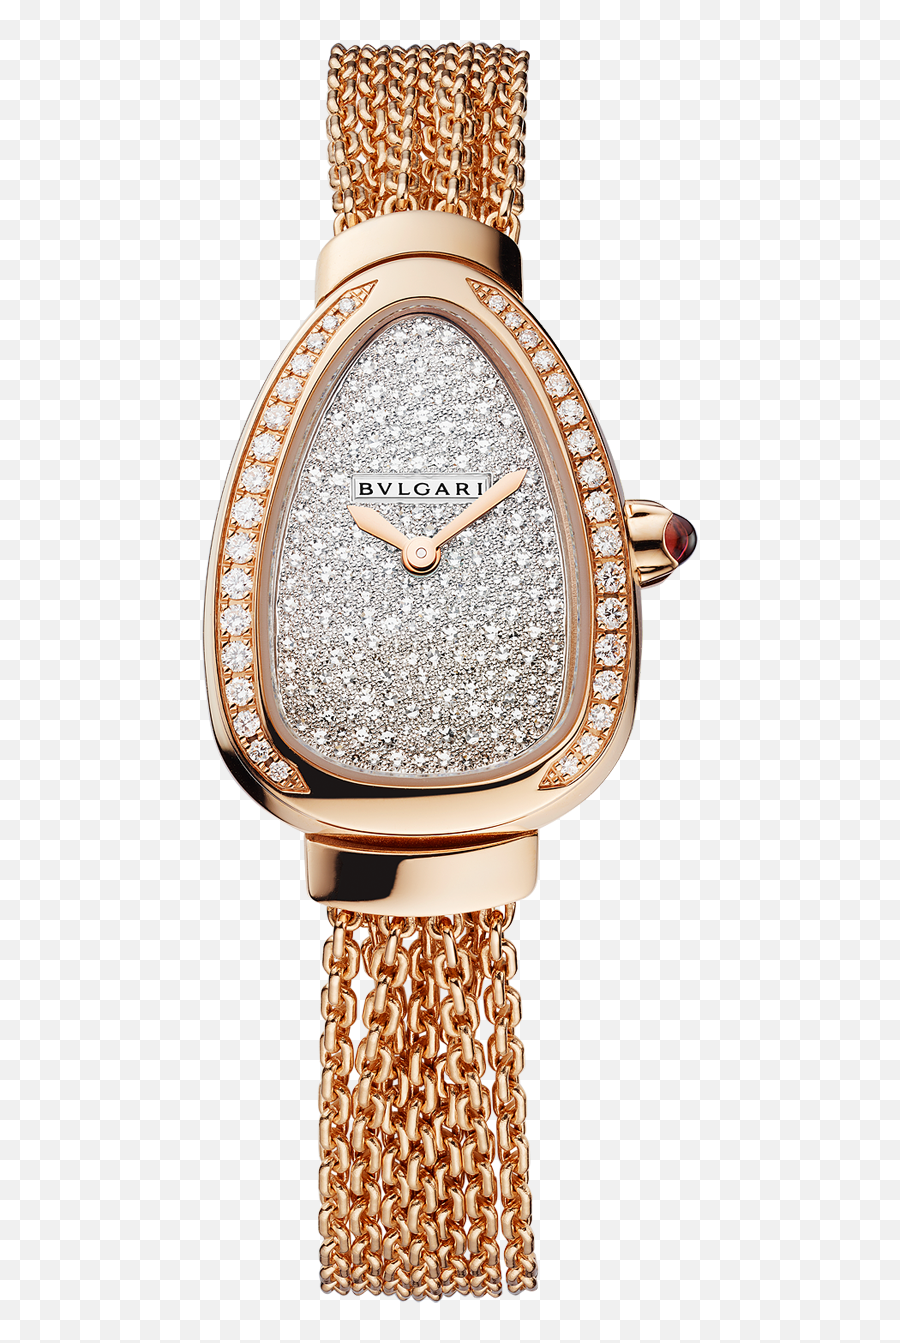 Best Replica Watches And Fake Watches - 18k Gold Bvlgari Serpenti Watch Emoji,Big Bang Theory The Emotion Detection Automation Watch Online